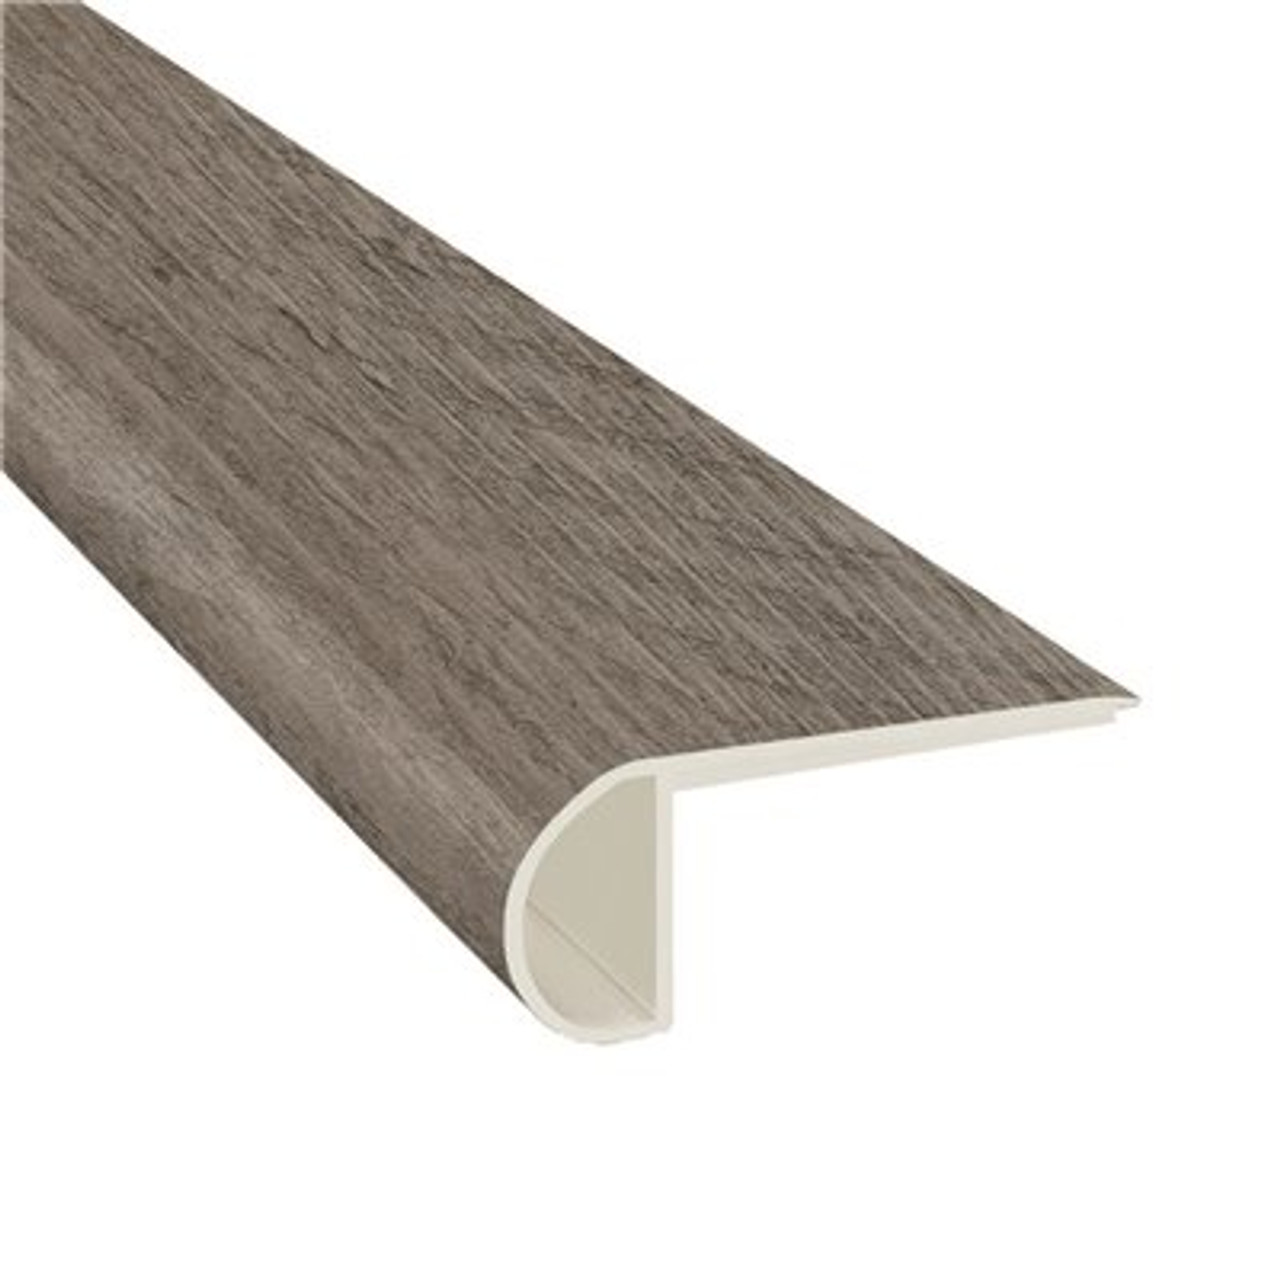 Msi Pelican 3/4 In. Thick X 2 3/4 In. Wide X 94 In. Length Luxury Vinyl Flush Stair Nose Molding